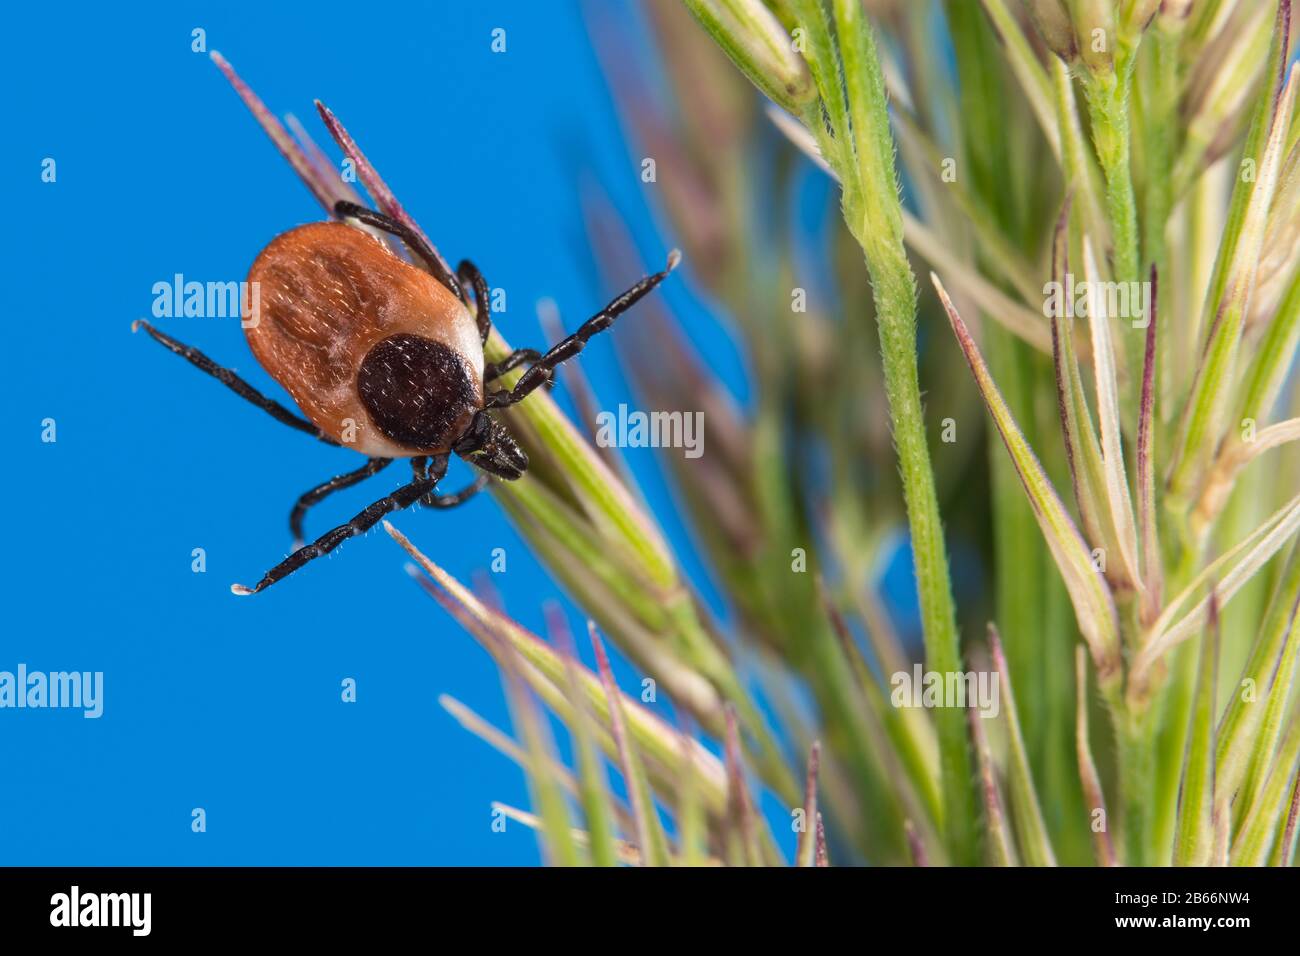 Female castor bean tick crawling on green grass spike. Ixodes ricinus or scapularis, spica. Dangerous lurking mite. Acari. Parasitic insect. Blue sky. Stock Photo